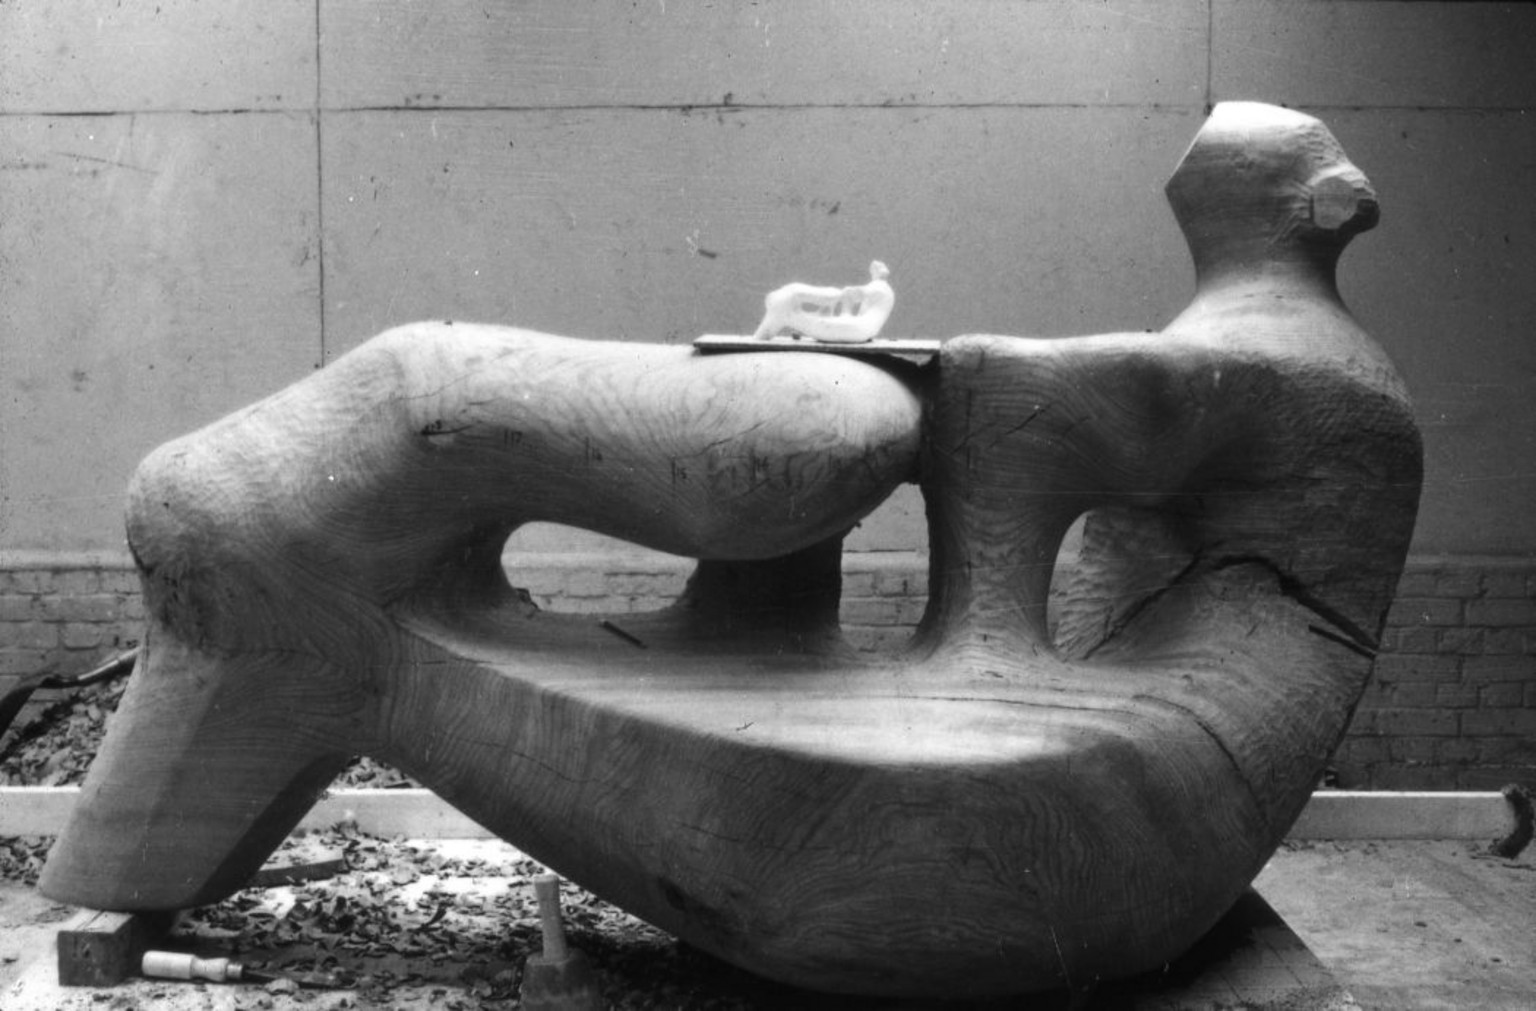 Ann Compton, \'\'An essentially | (Henry in Rediscovering of Sculptural Moore\'s Public Tate Identity) and Moore: Process Wood\' different Henry kind Sculpture rhythm